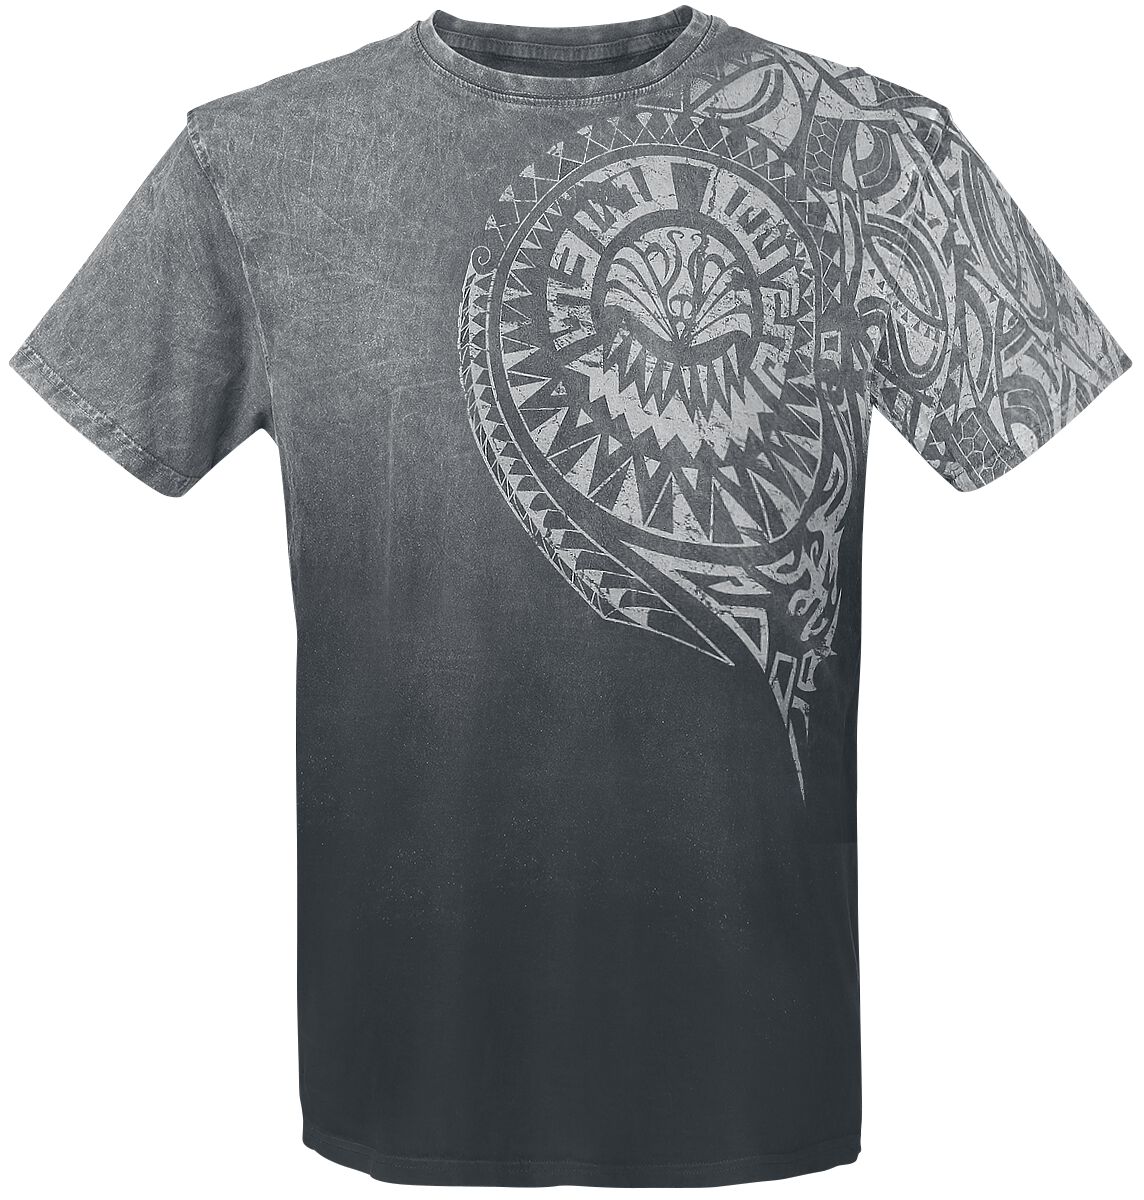 Outer Vision Burned Tattoo T-Shirt grau in 4XL von Outer Vision